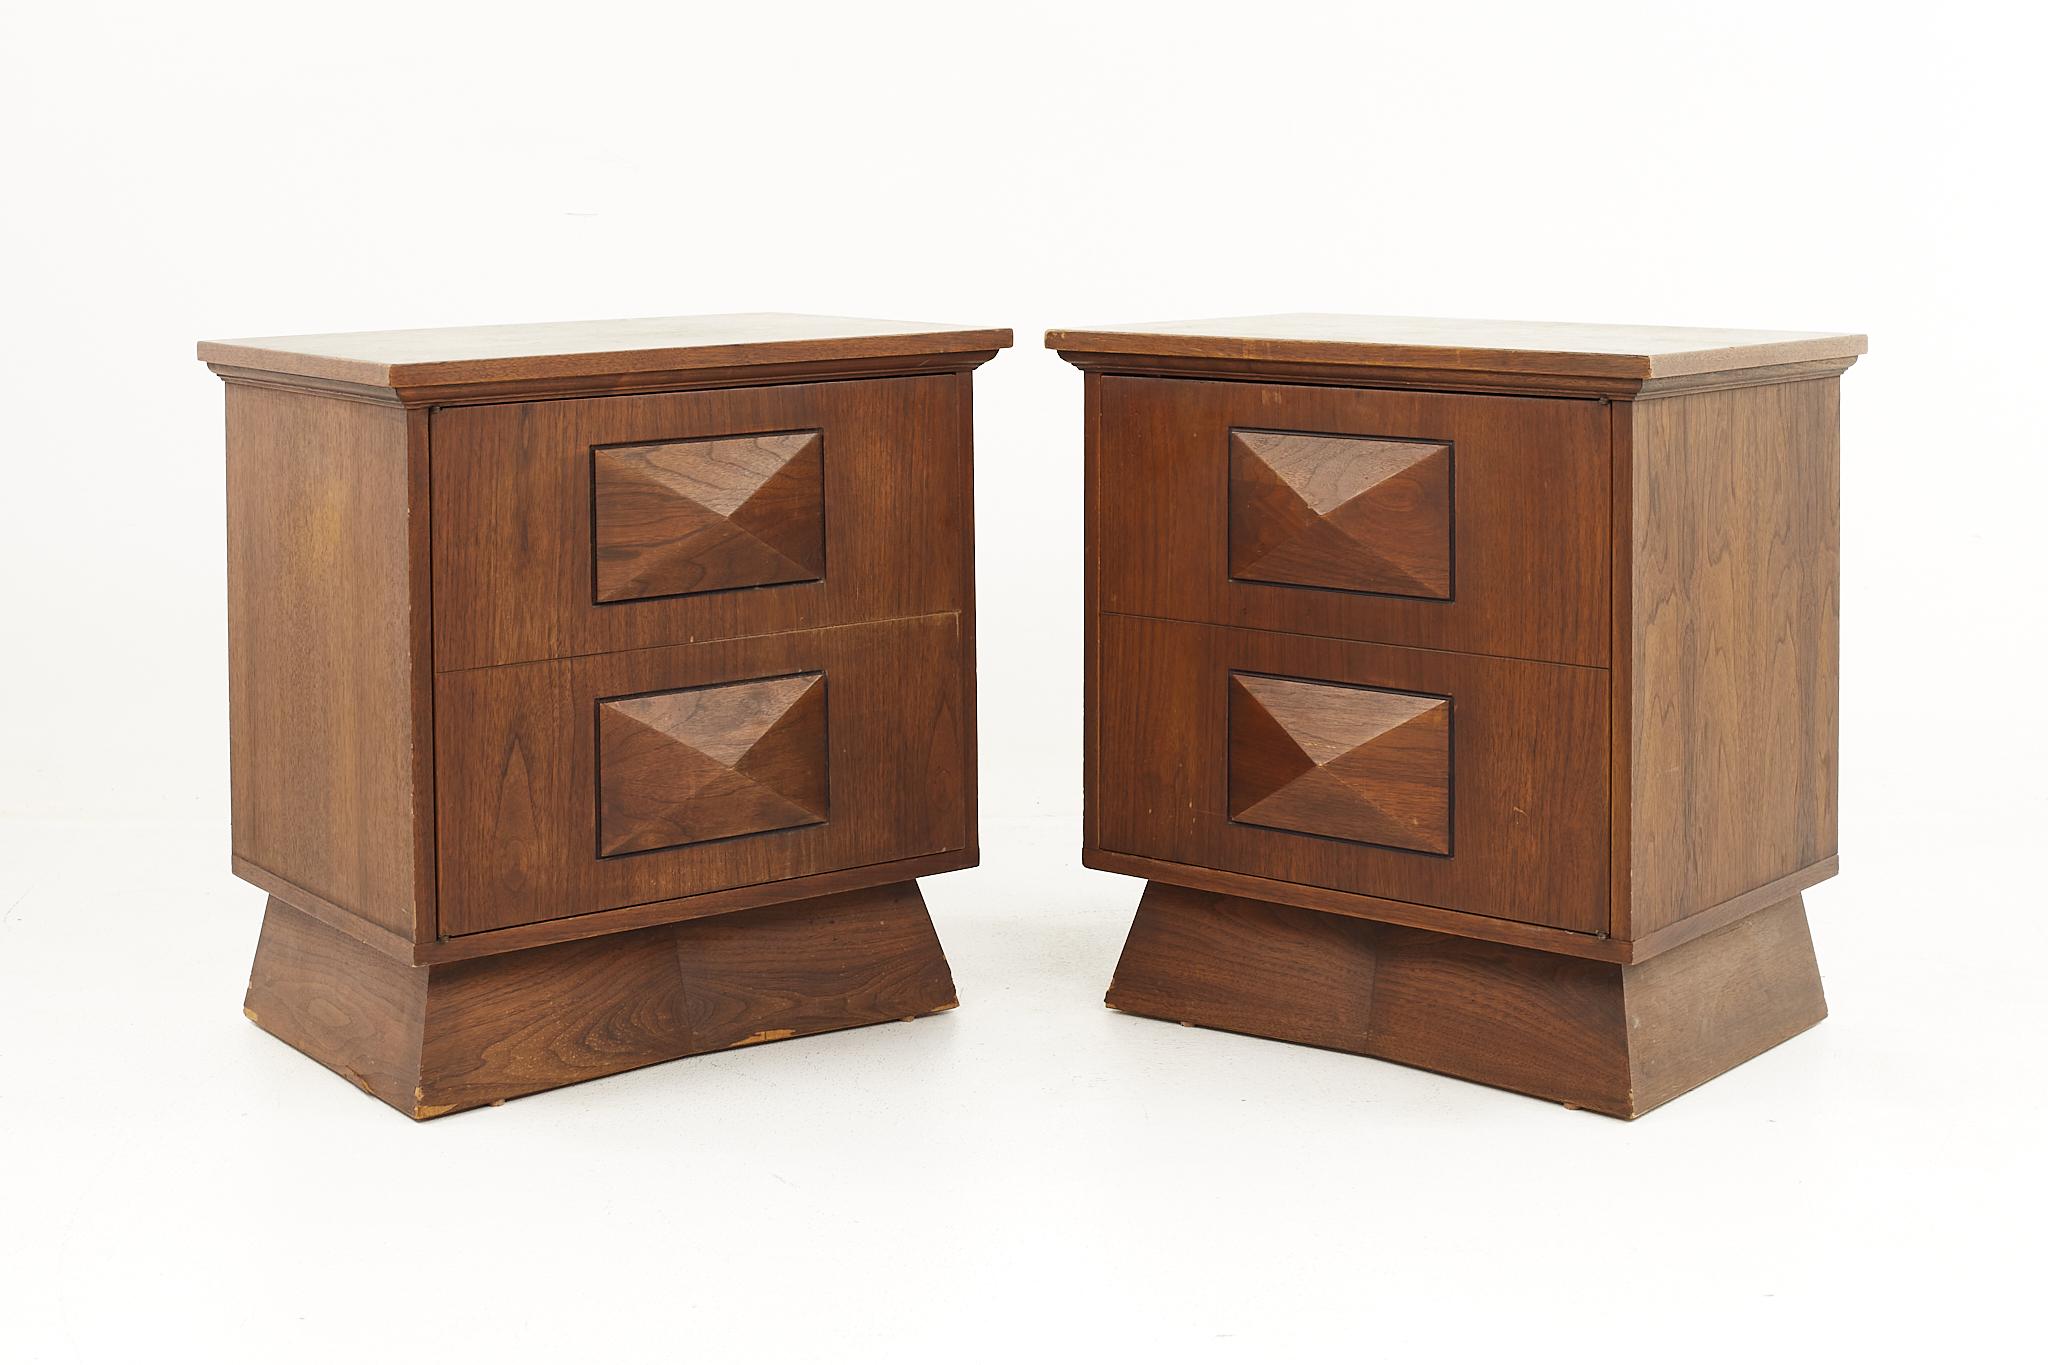 Paul Evans Style Mid Century Brutalist Walnut Nightstands - A Pair

Each nightstand measures: 24 wide x 17 deep x 24.75 inches high

All pieces of furniture can be had in what we call restored vintage condition. That means the piece is restored